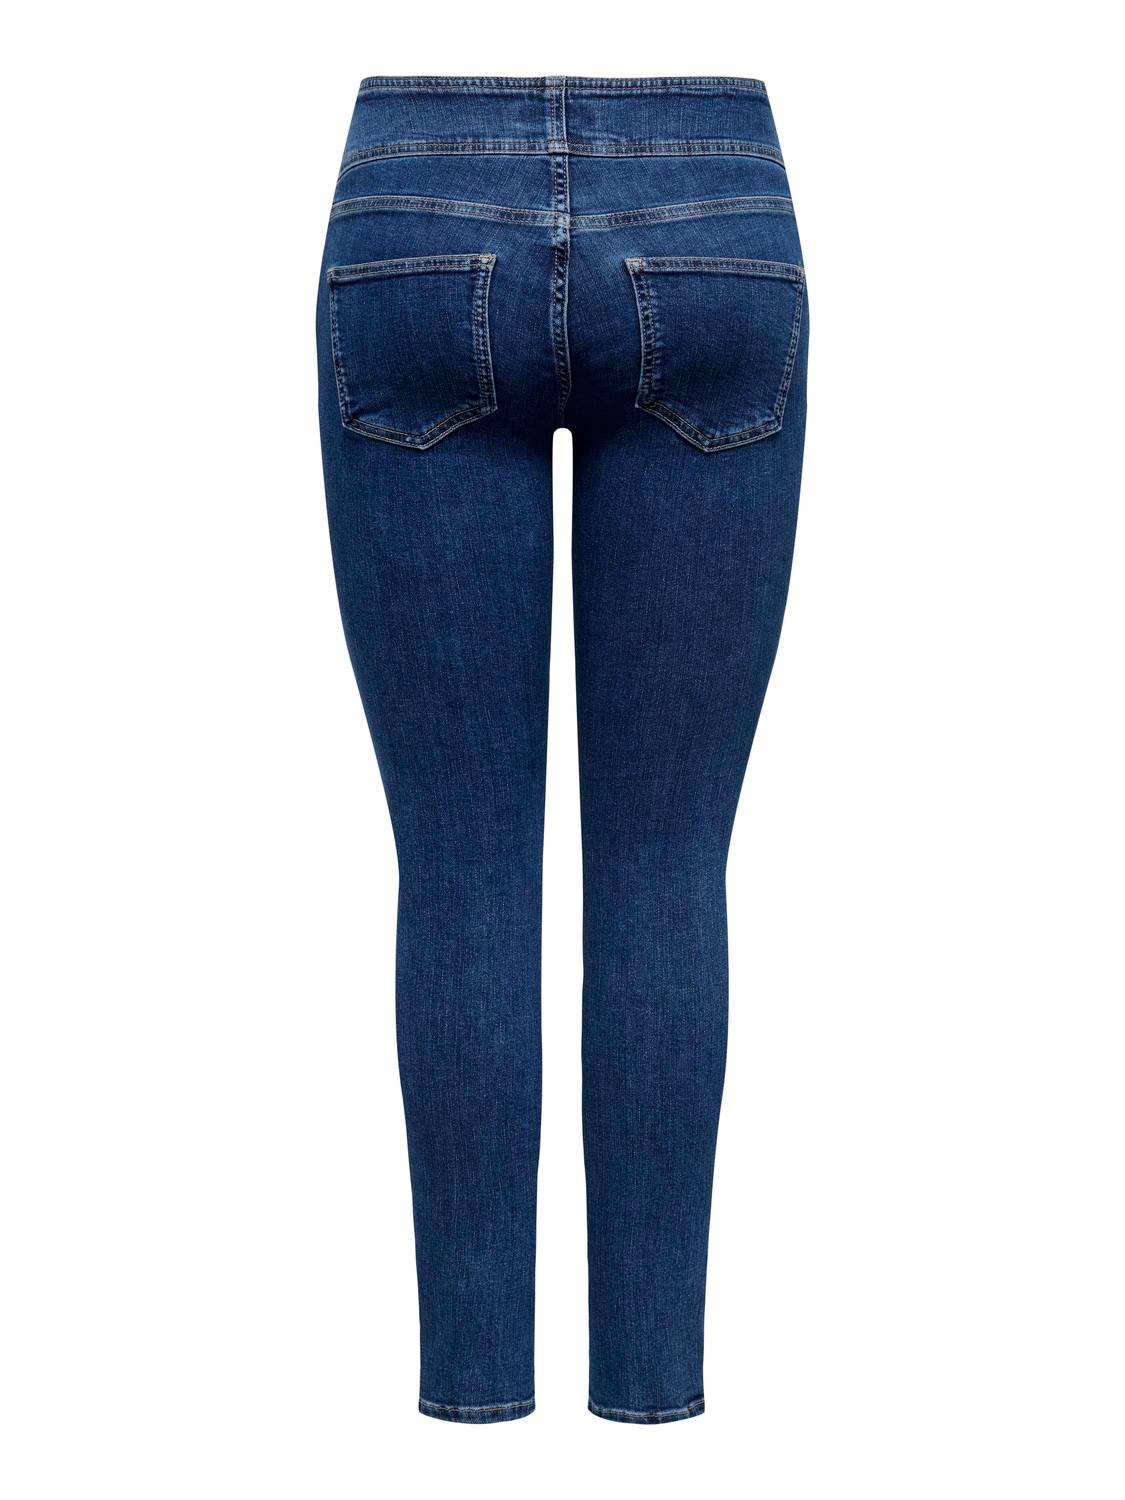 ONLY Skinny Fit Hohe Taille Jeans -Dark Blue Denim - 15300533